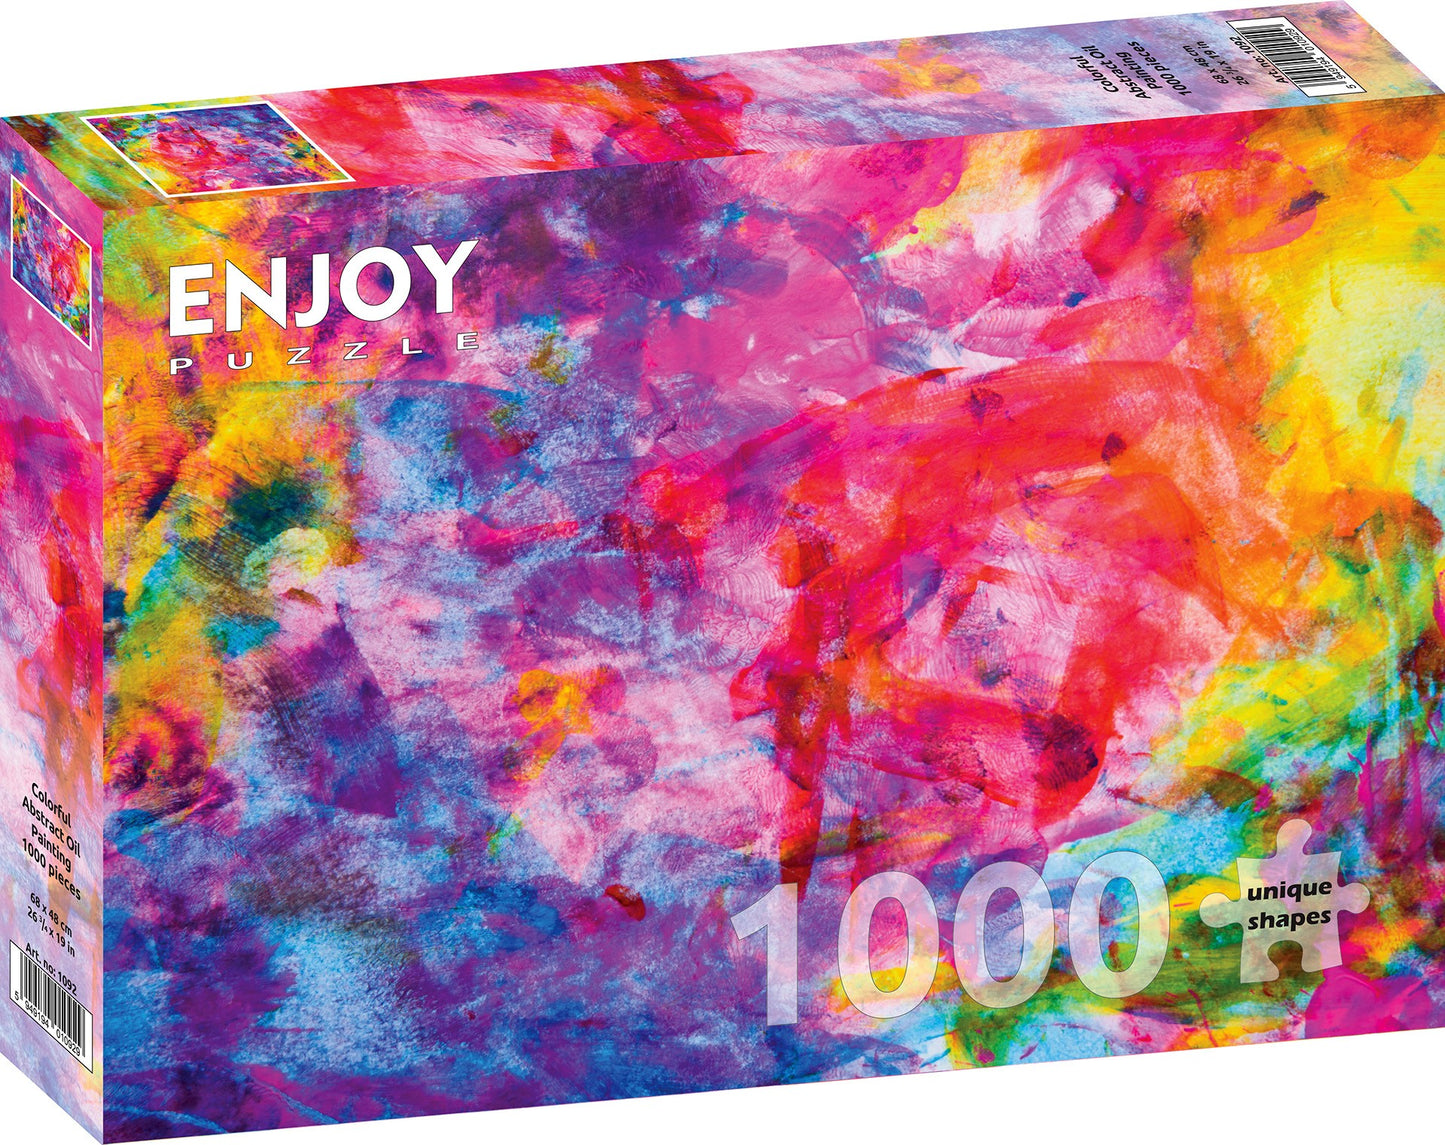 1000 Pieces Jigsaw Puzzle - Colourful Abstract Oil Painting